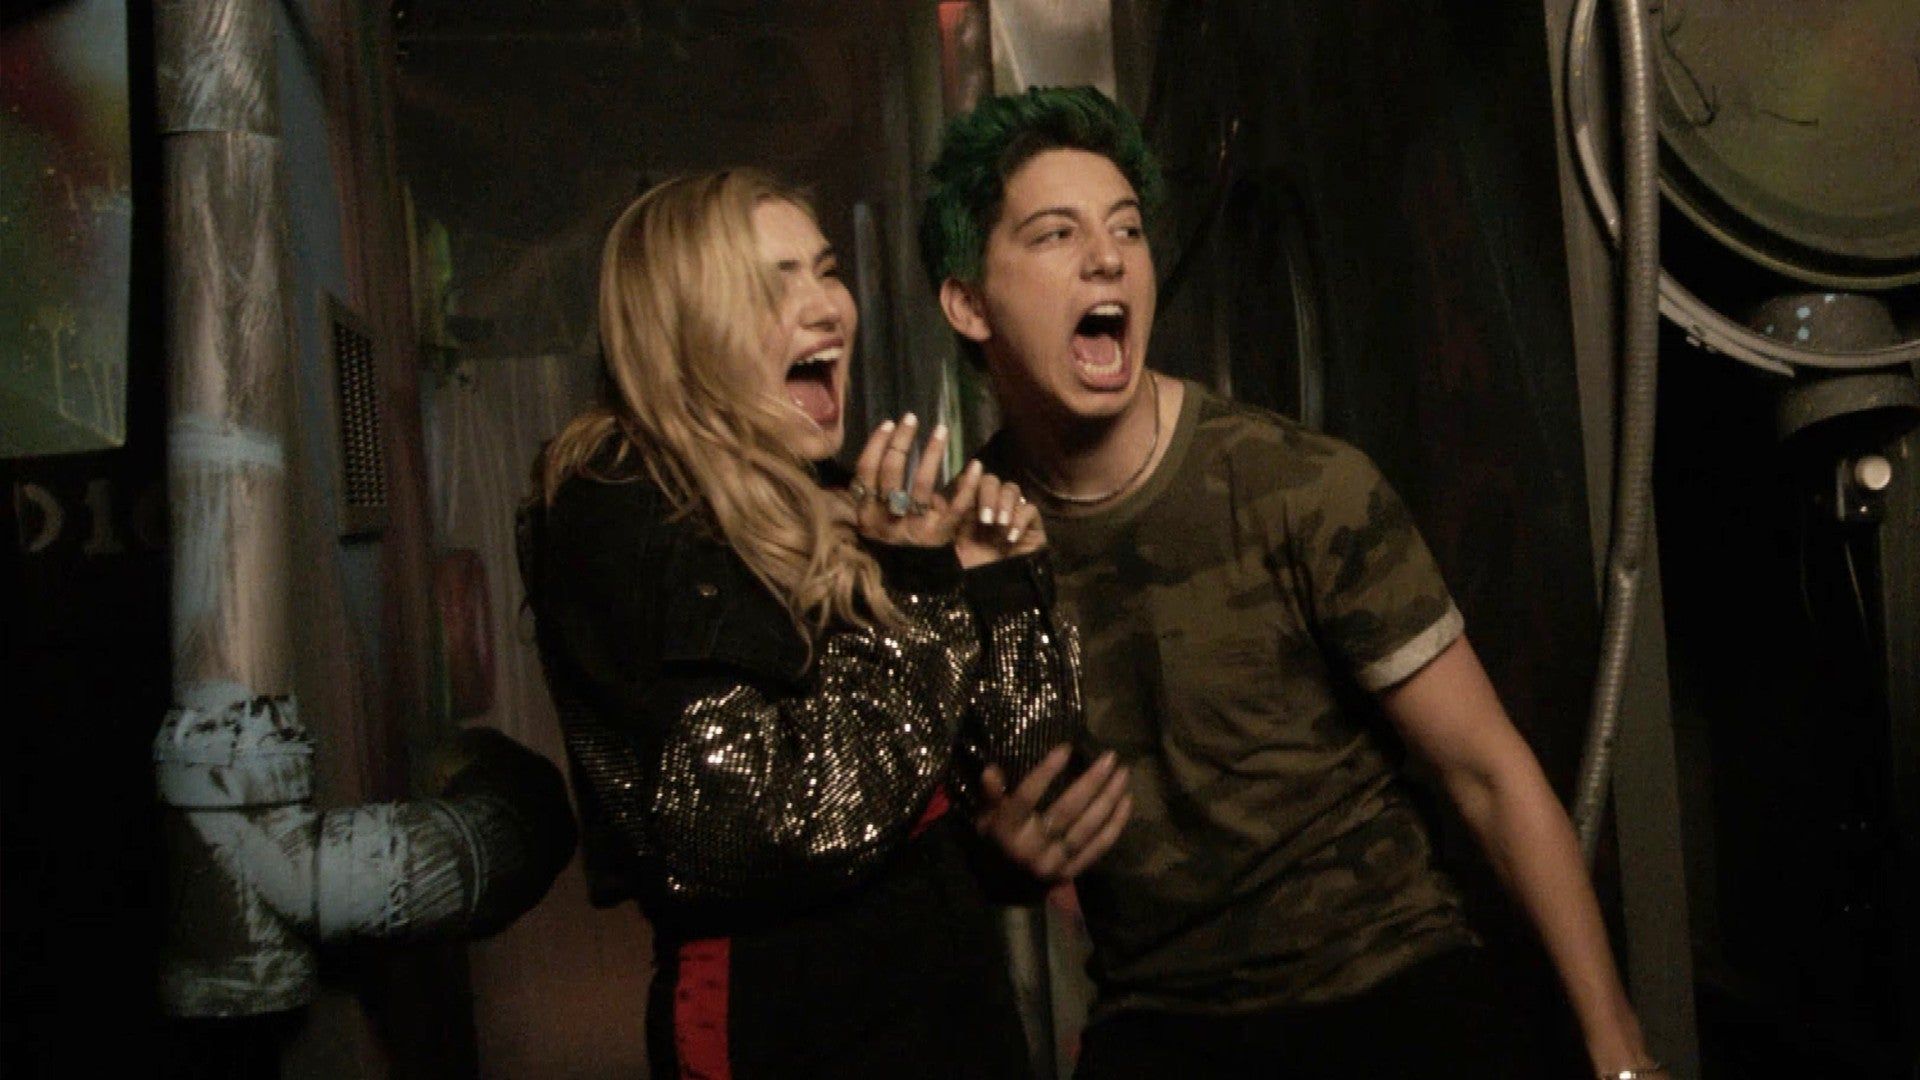 Watch 'Zombies 2' Stars Milo Manheim and Meg Donnelly Take on a